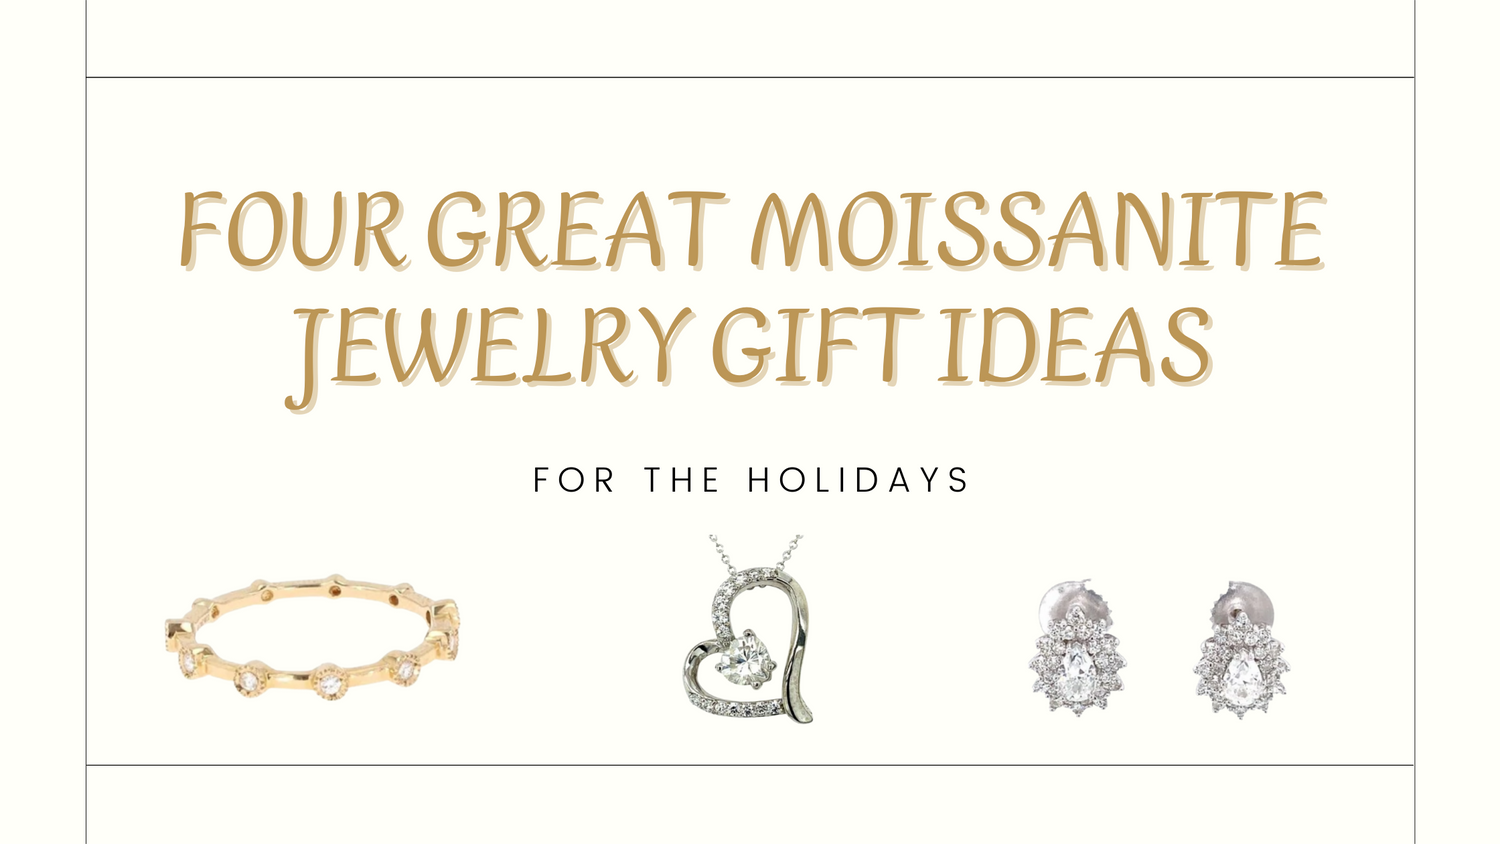 Four Great Moissanite Jewelry Gift Ideas for The Holidays